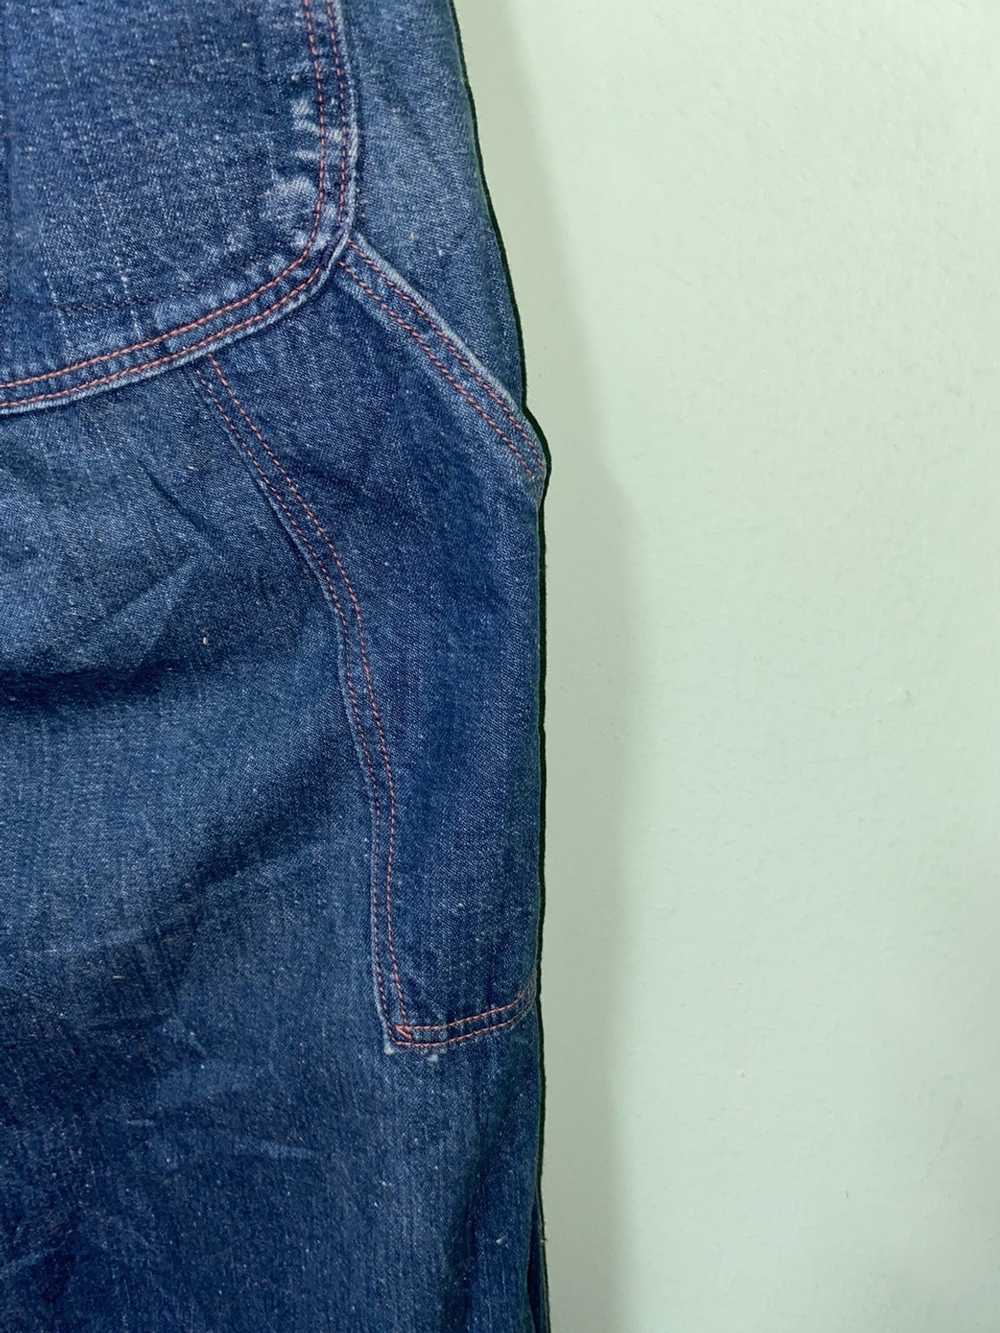 Orslow 40s -50s Orslow Workers Jeans - image 6